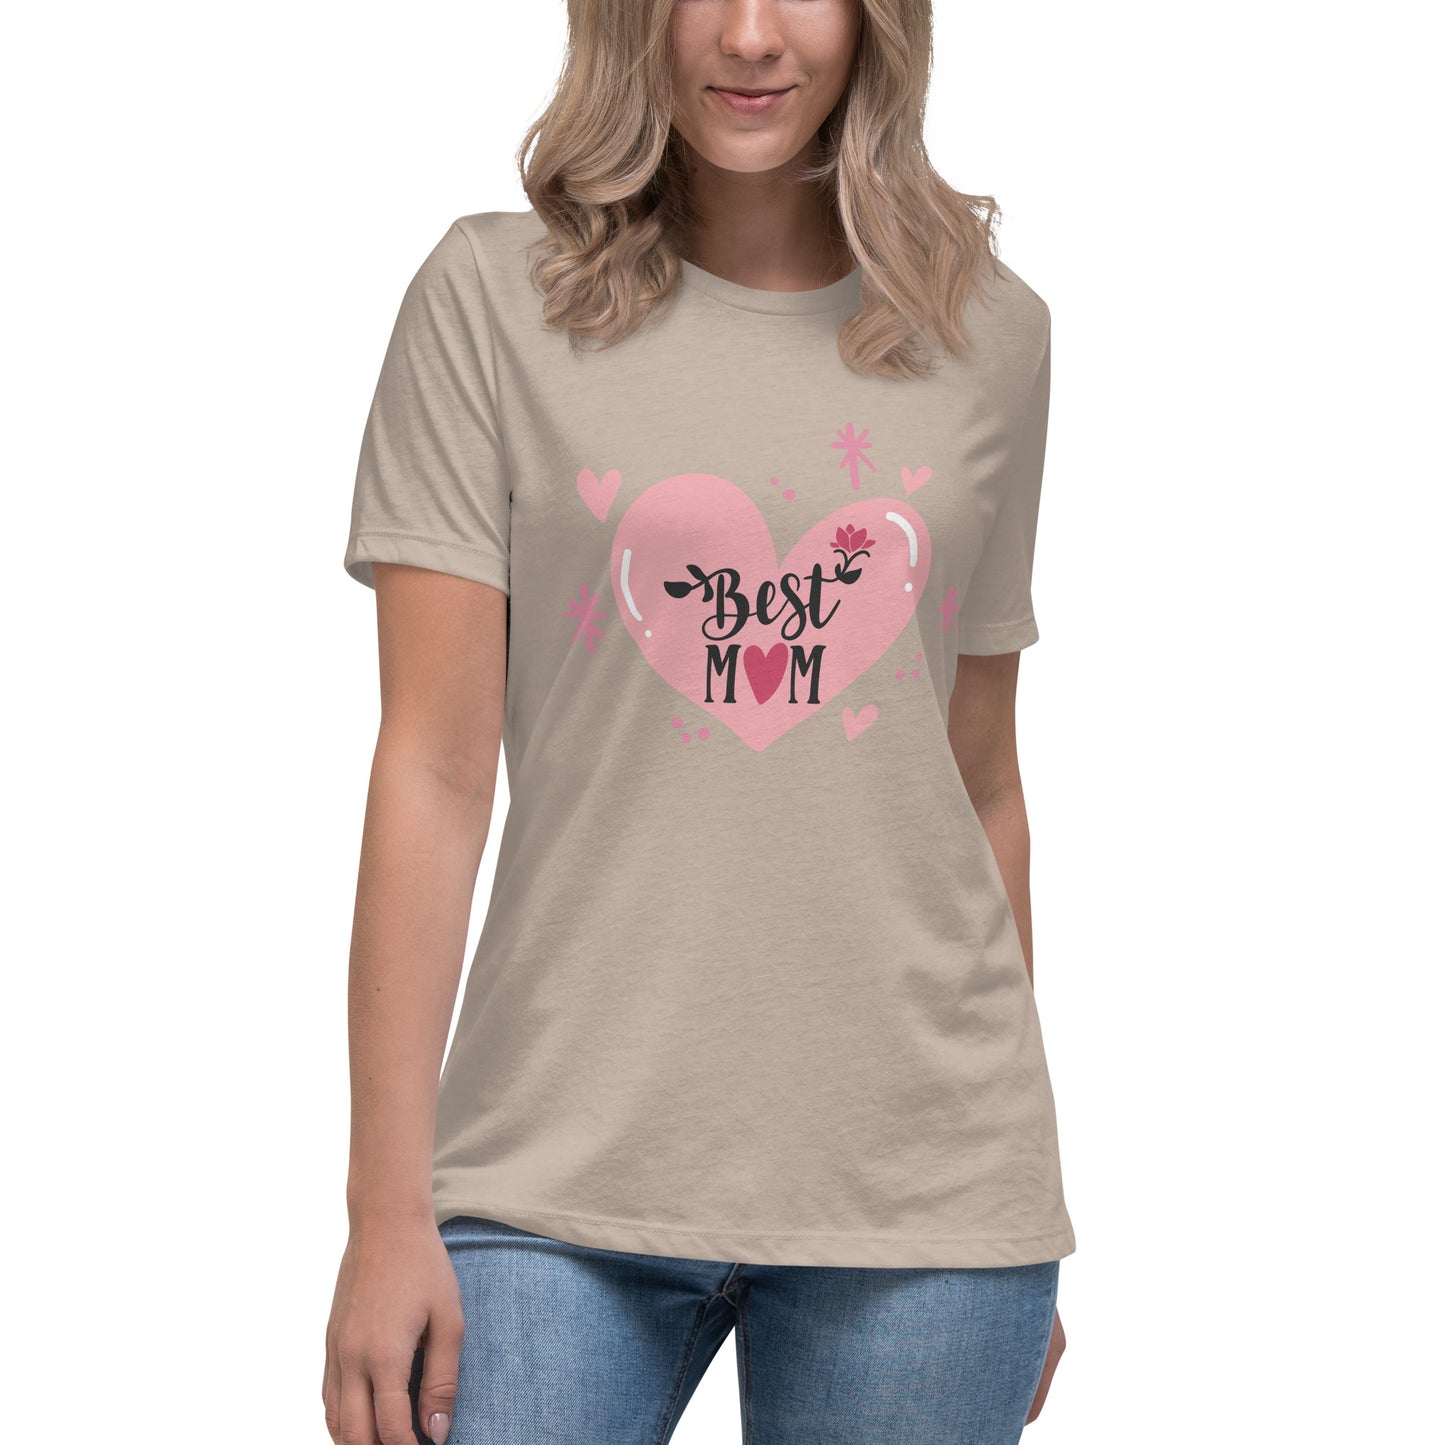 Women with stone t shirt with hart and text best MOM